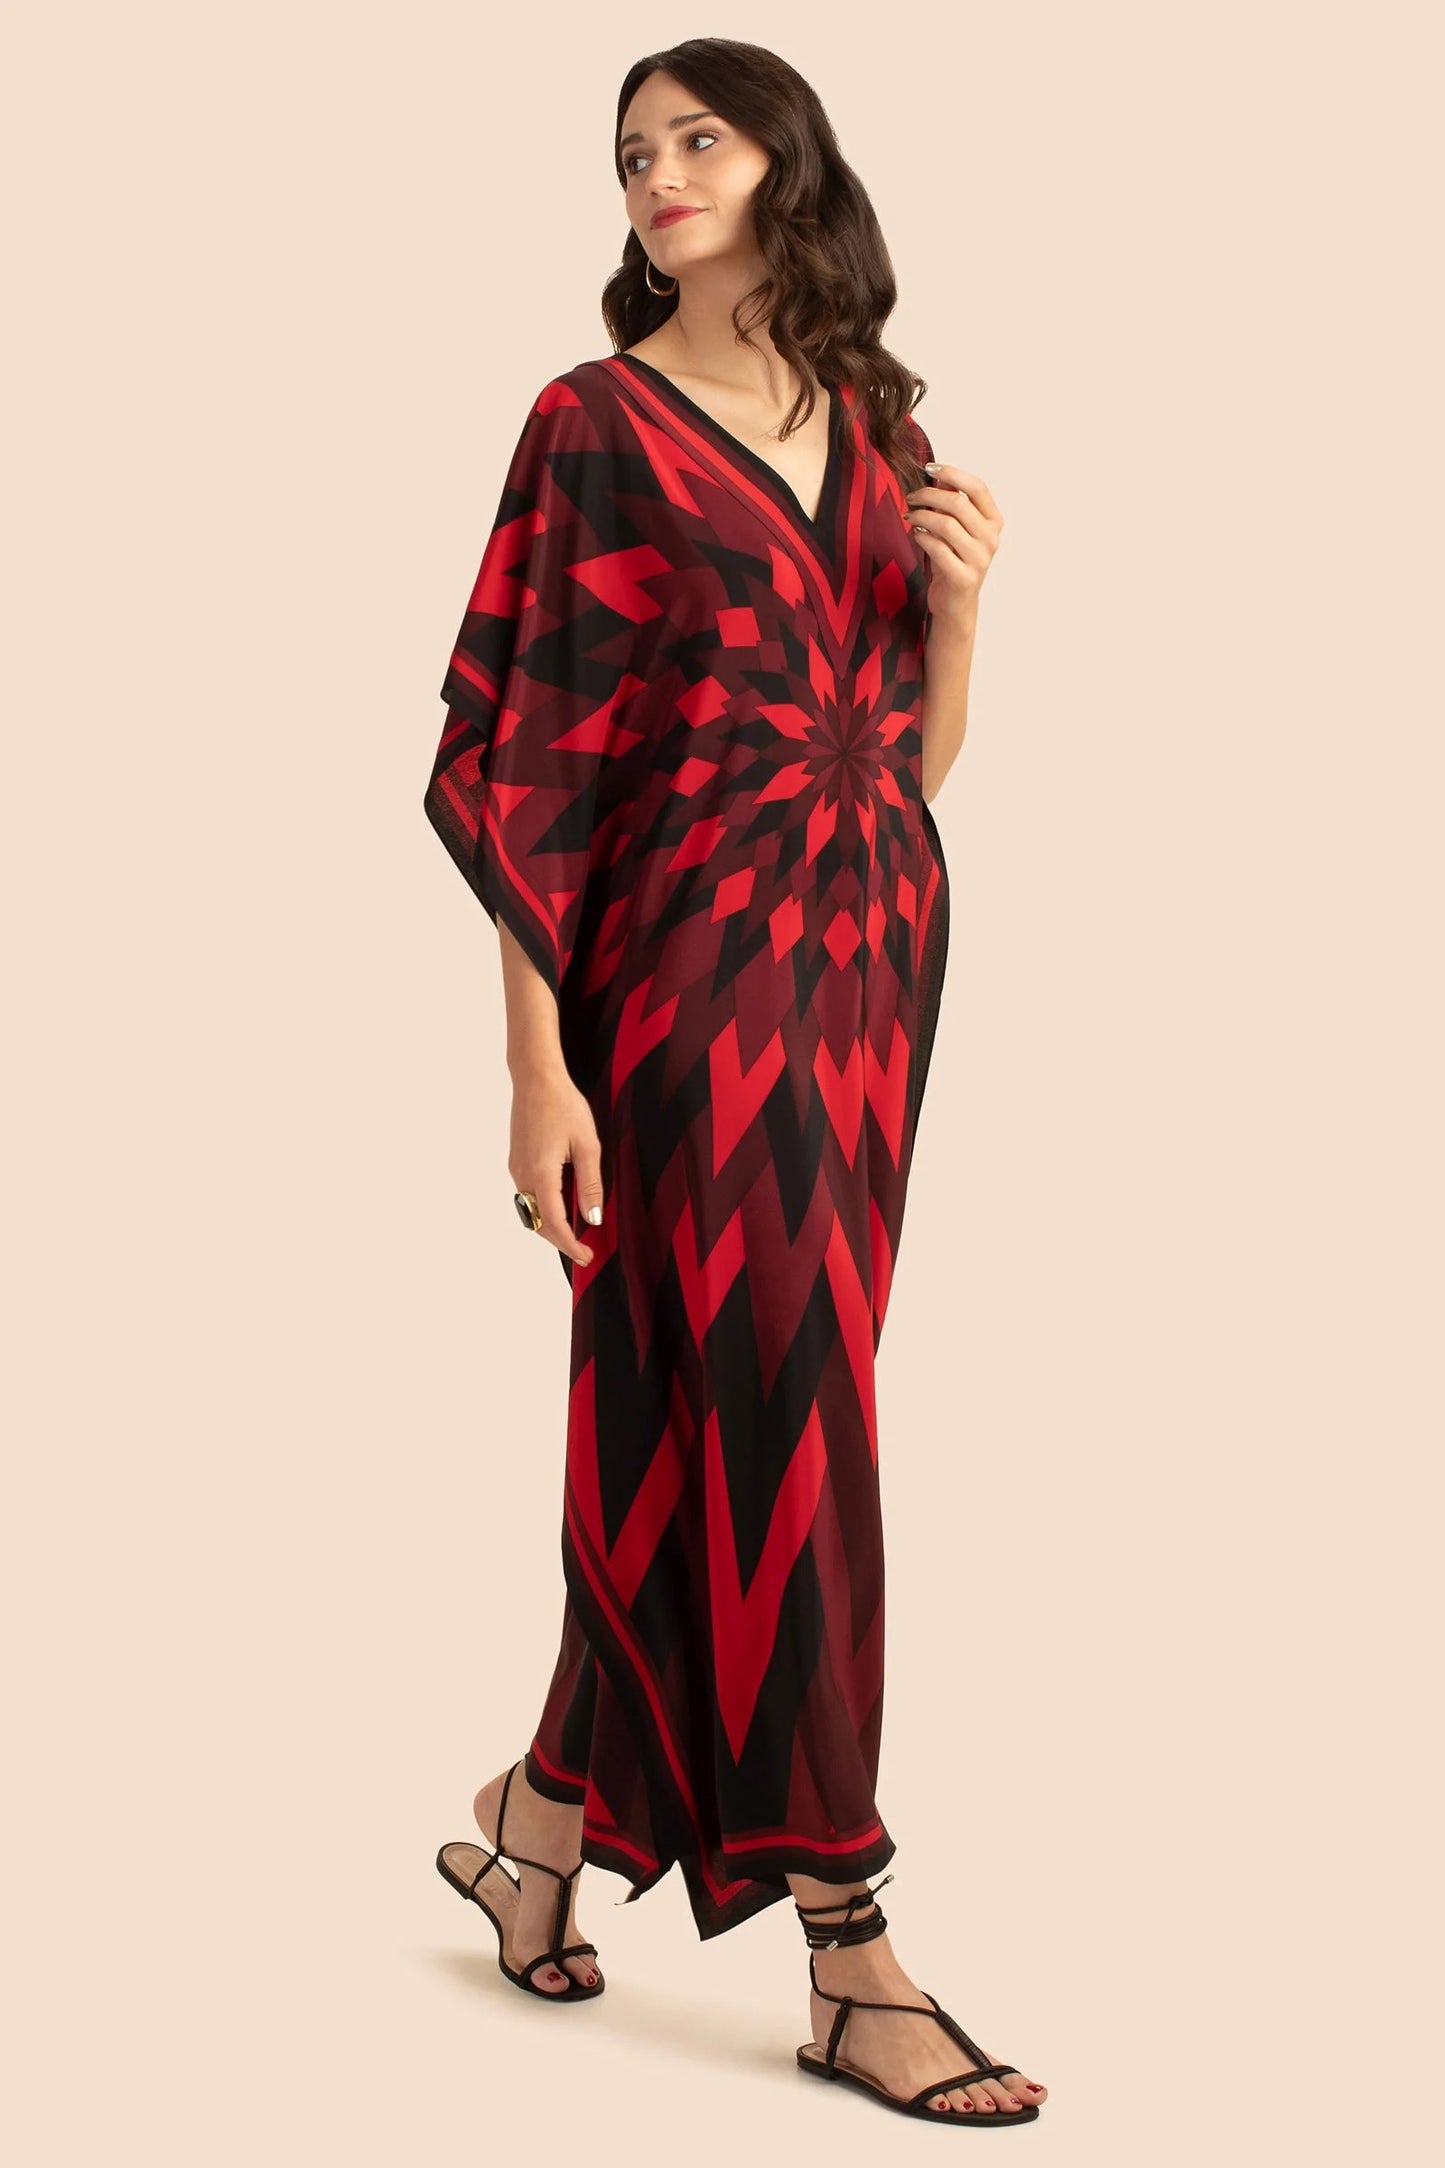 The model in the image is wearing Red Colour Soft Silk  Daily Wear Women Kaftan from Alice Milan. Crafted with the finest materials and impeccable attention to detail, the Kaftan / Dress looks premium, trendy, luxurious and offers unparalleled comfort. It’s a perfect clothing option for loungewear, resort wear, party wear or for an airport look. The woman in the image looks happy, and confident with her style statement putting a happy smile on her face.